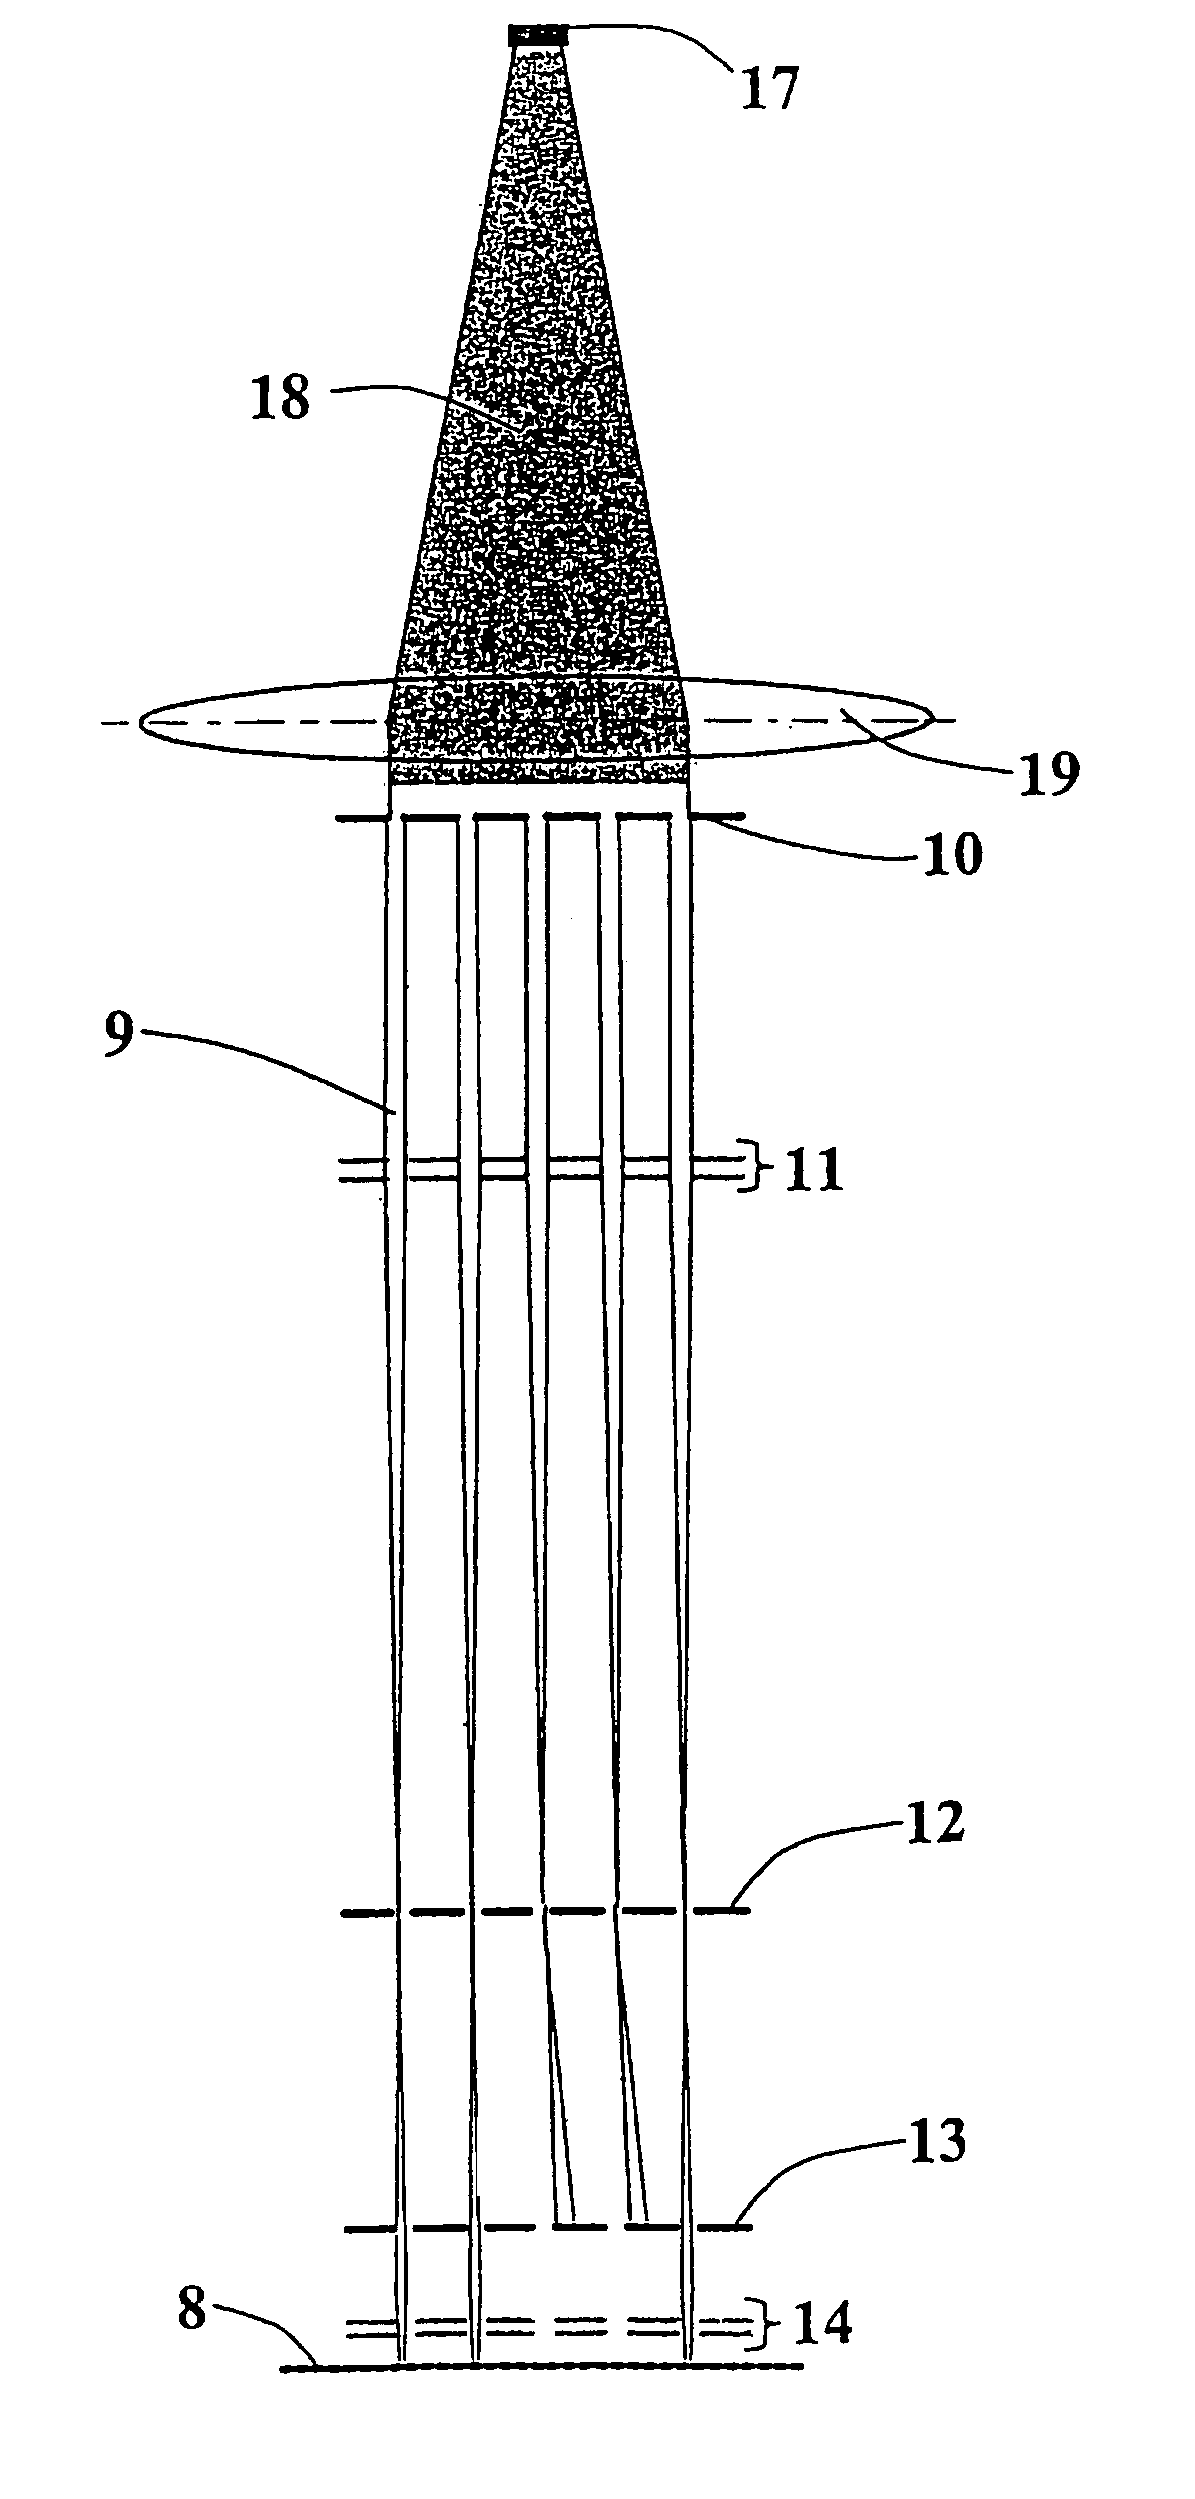 Charged particle beamlet exposure system